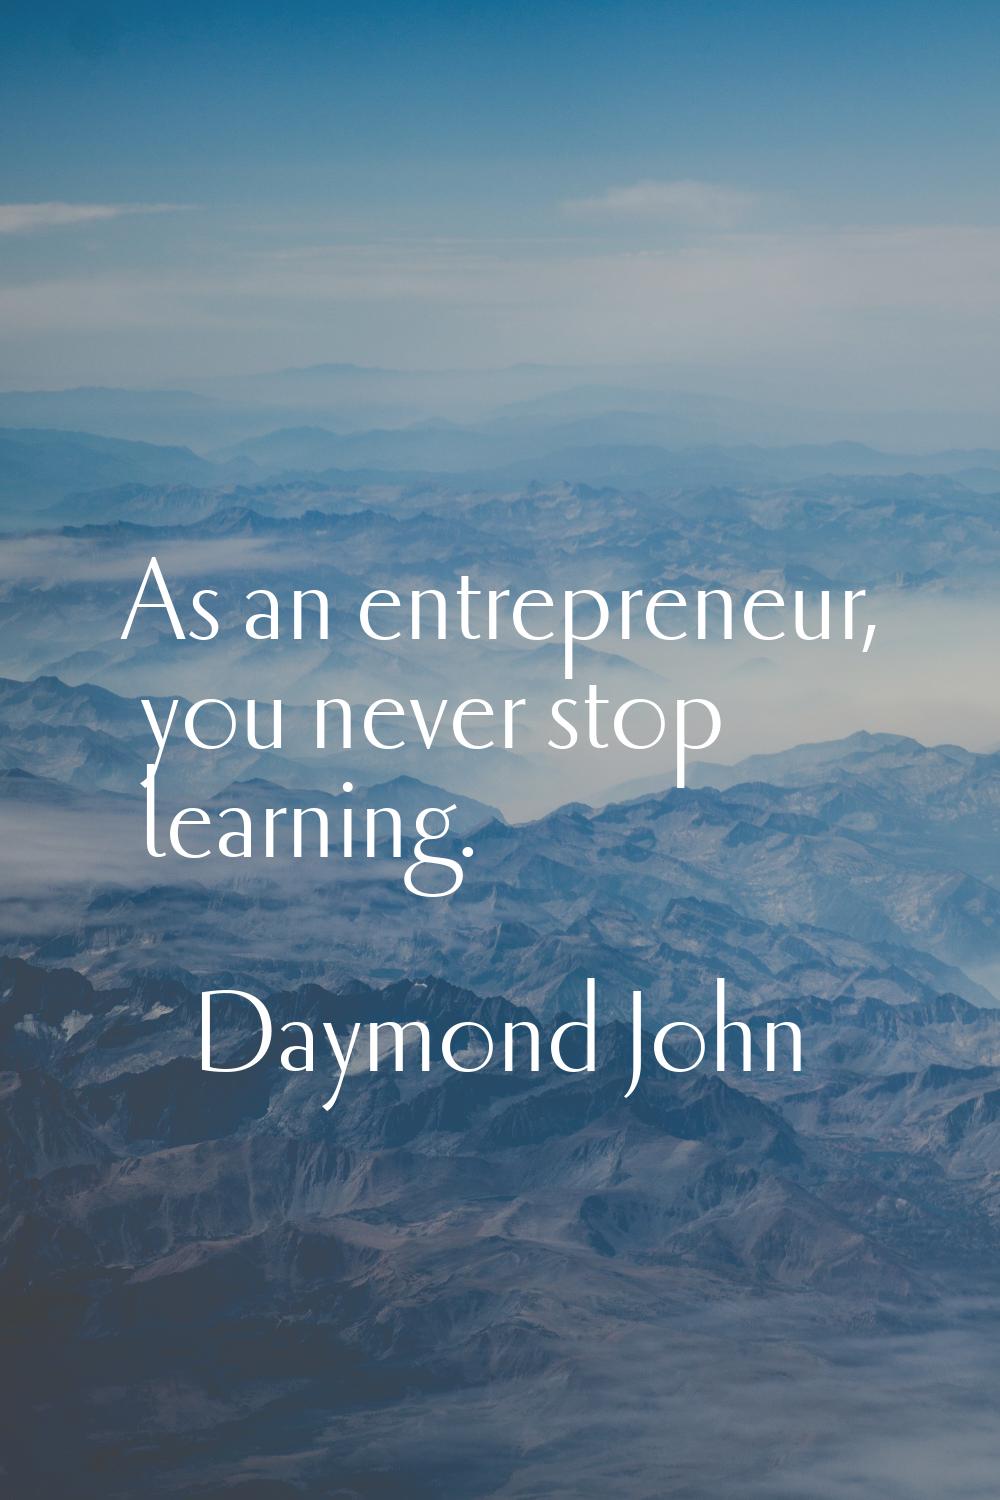 As an entrepreneur, you never stop learning.